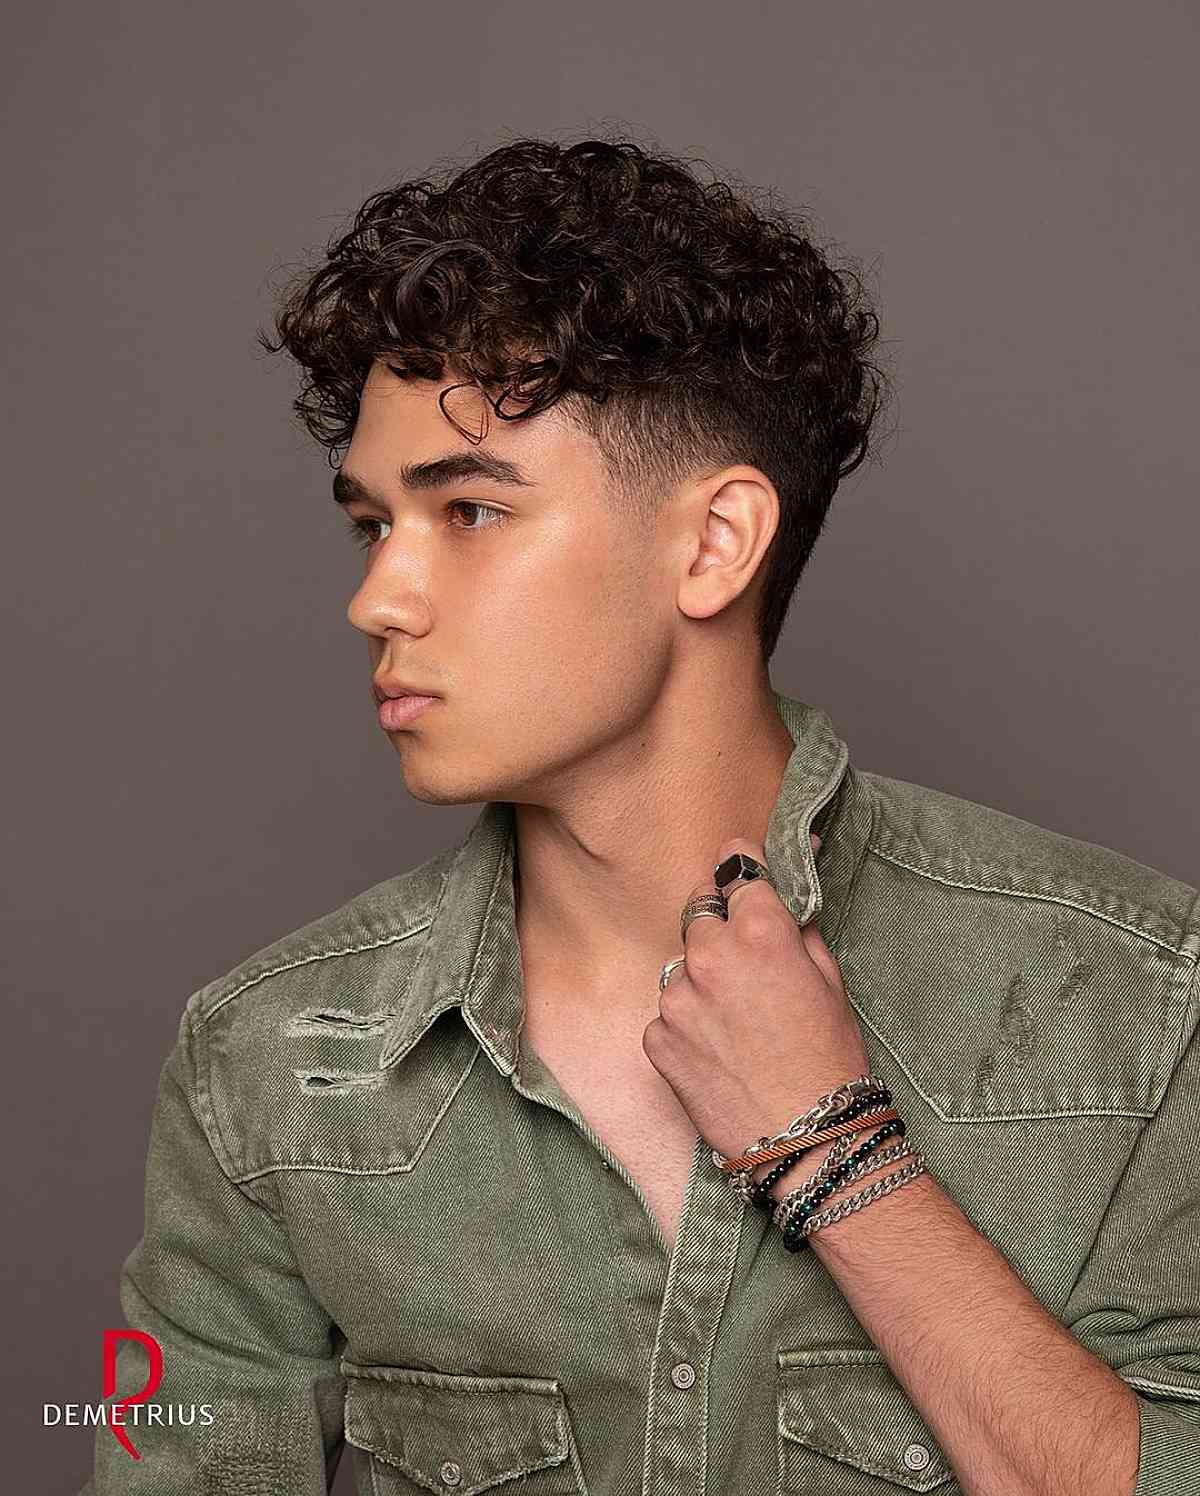 longer curly hair on top with short sides